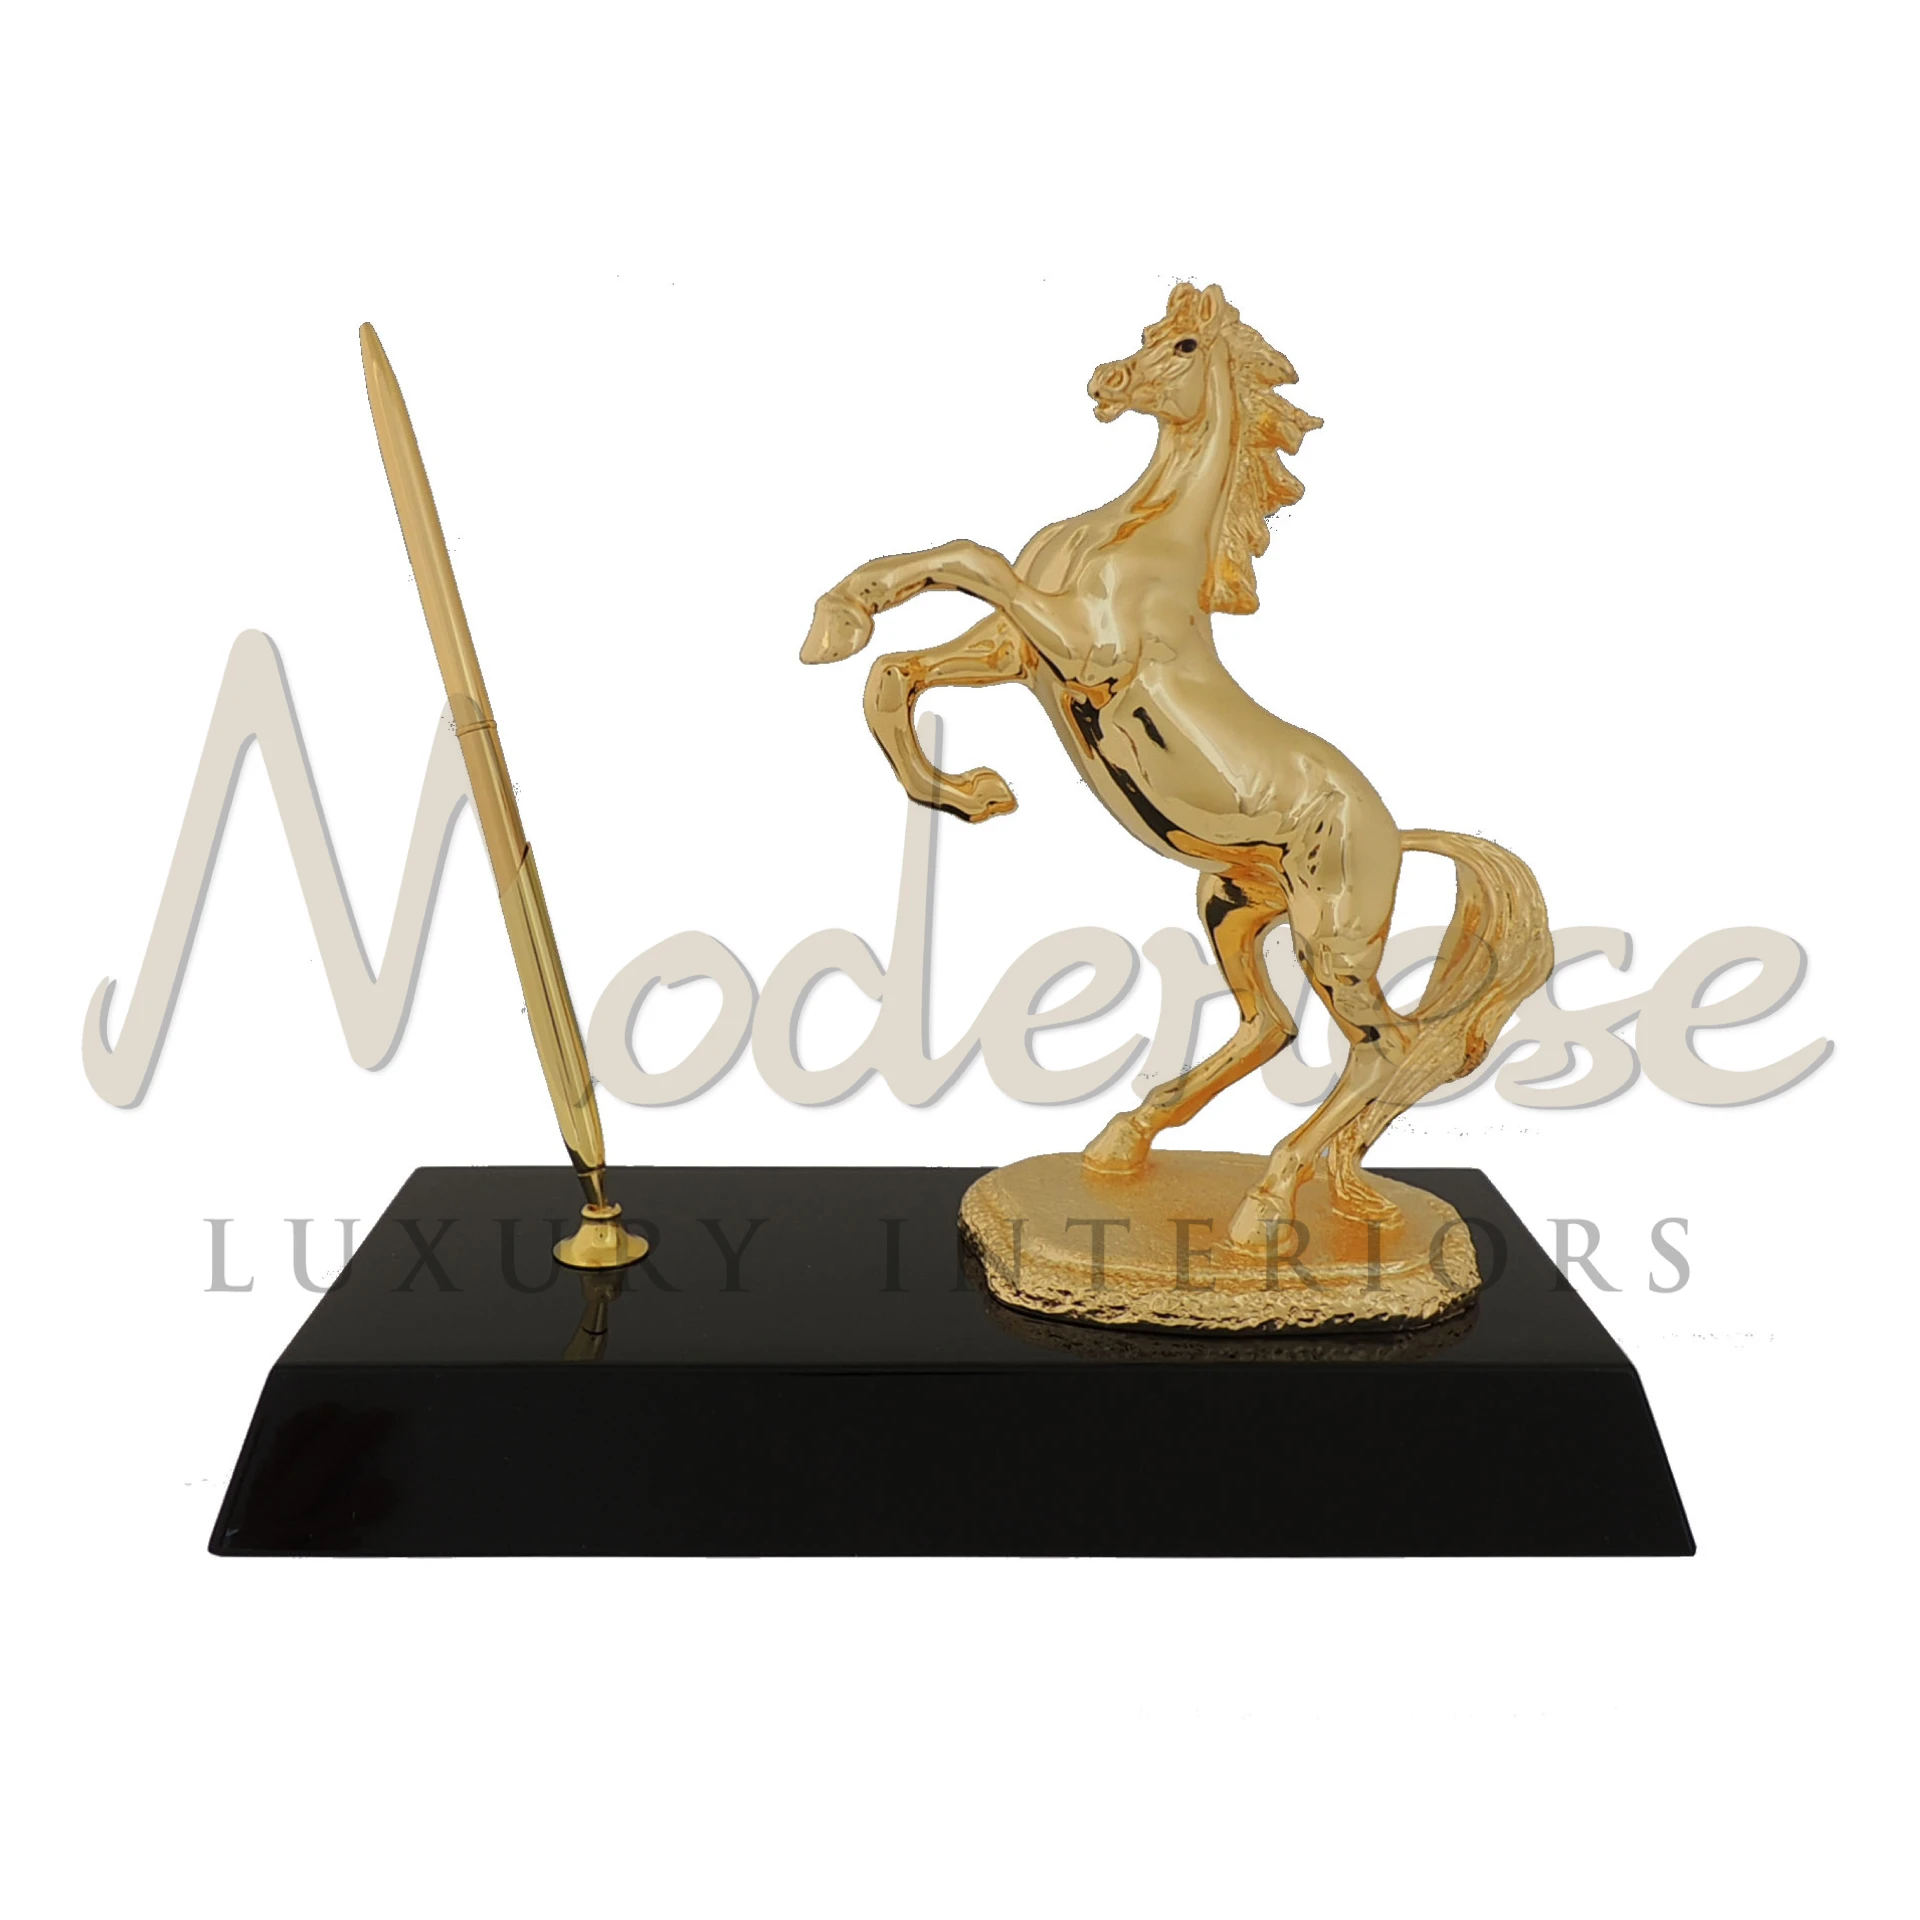 Horse and Pen Office Ornament with gold leaf detailing, crafted in premium materials, perfect for adding a luxurious touch to office decor.






